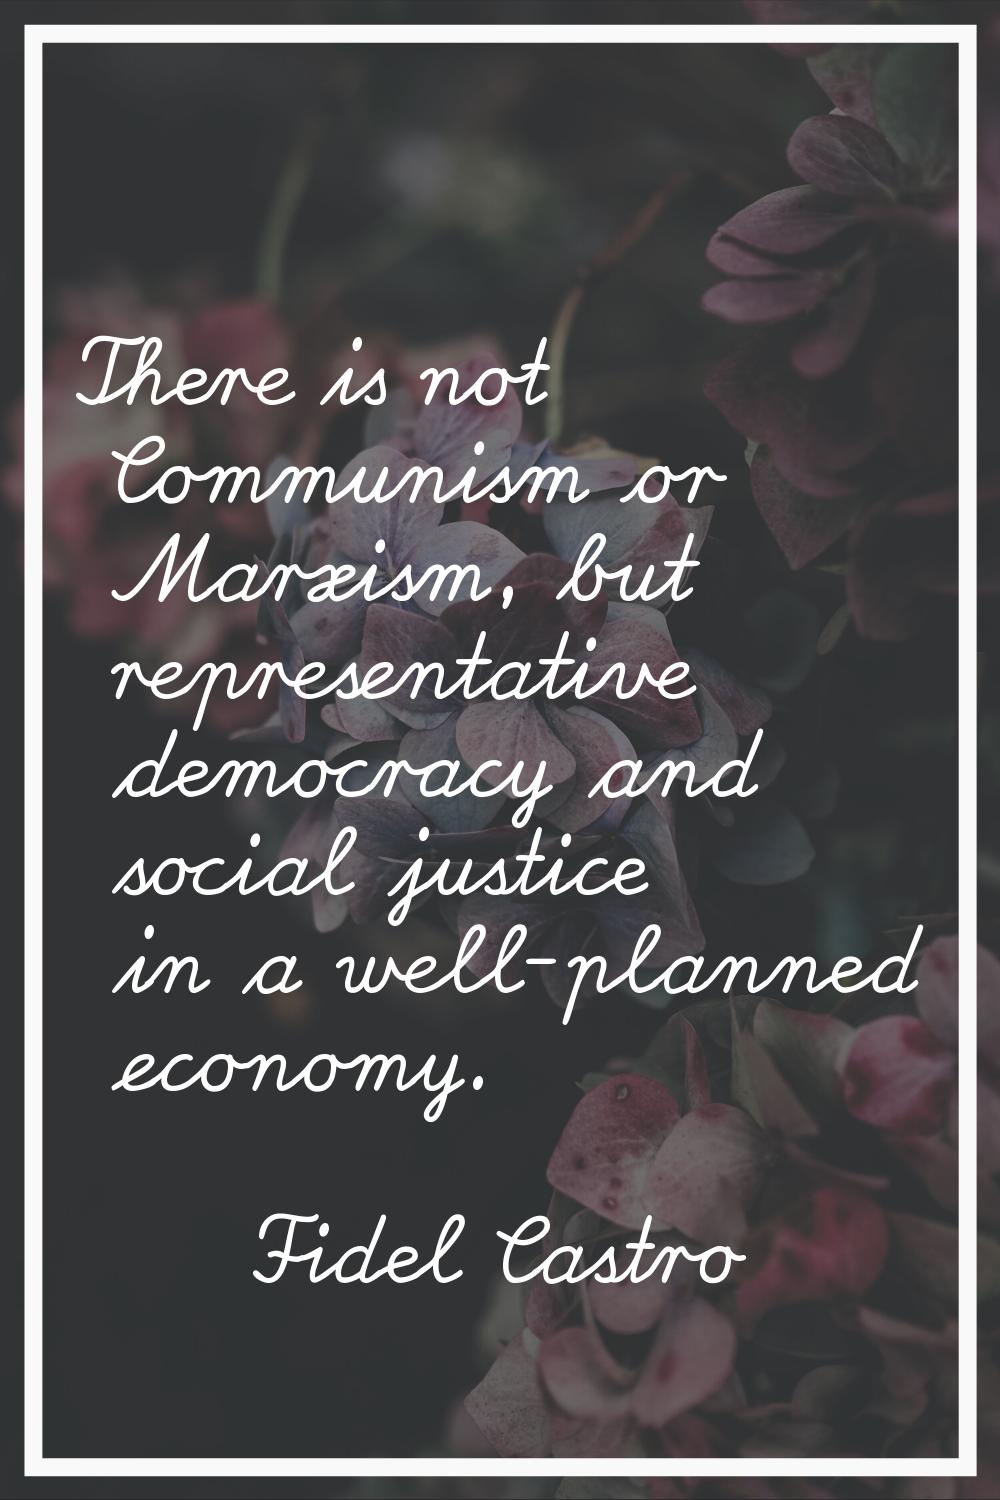 There is not Communism or Marxism, but representative democracy and social justice in a well-planne